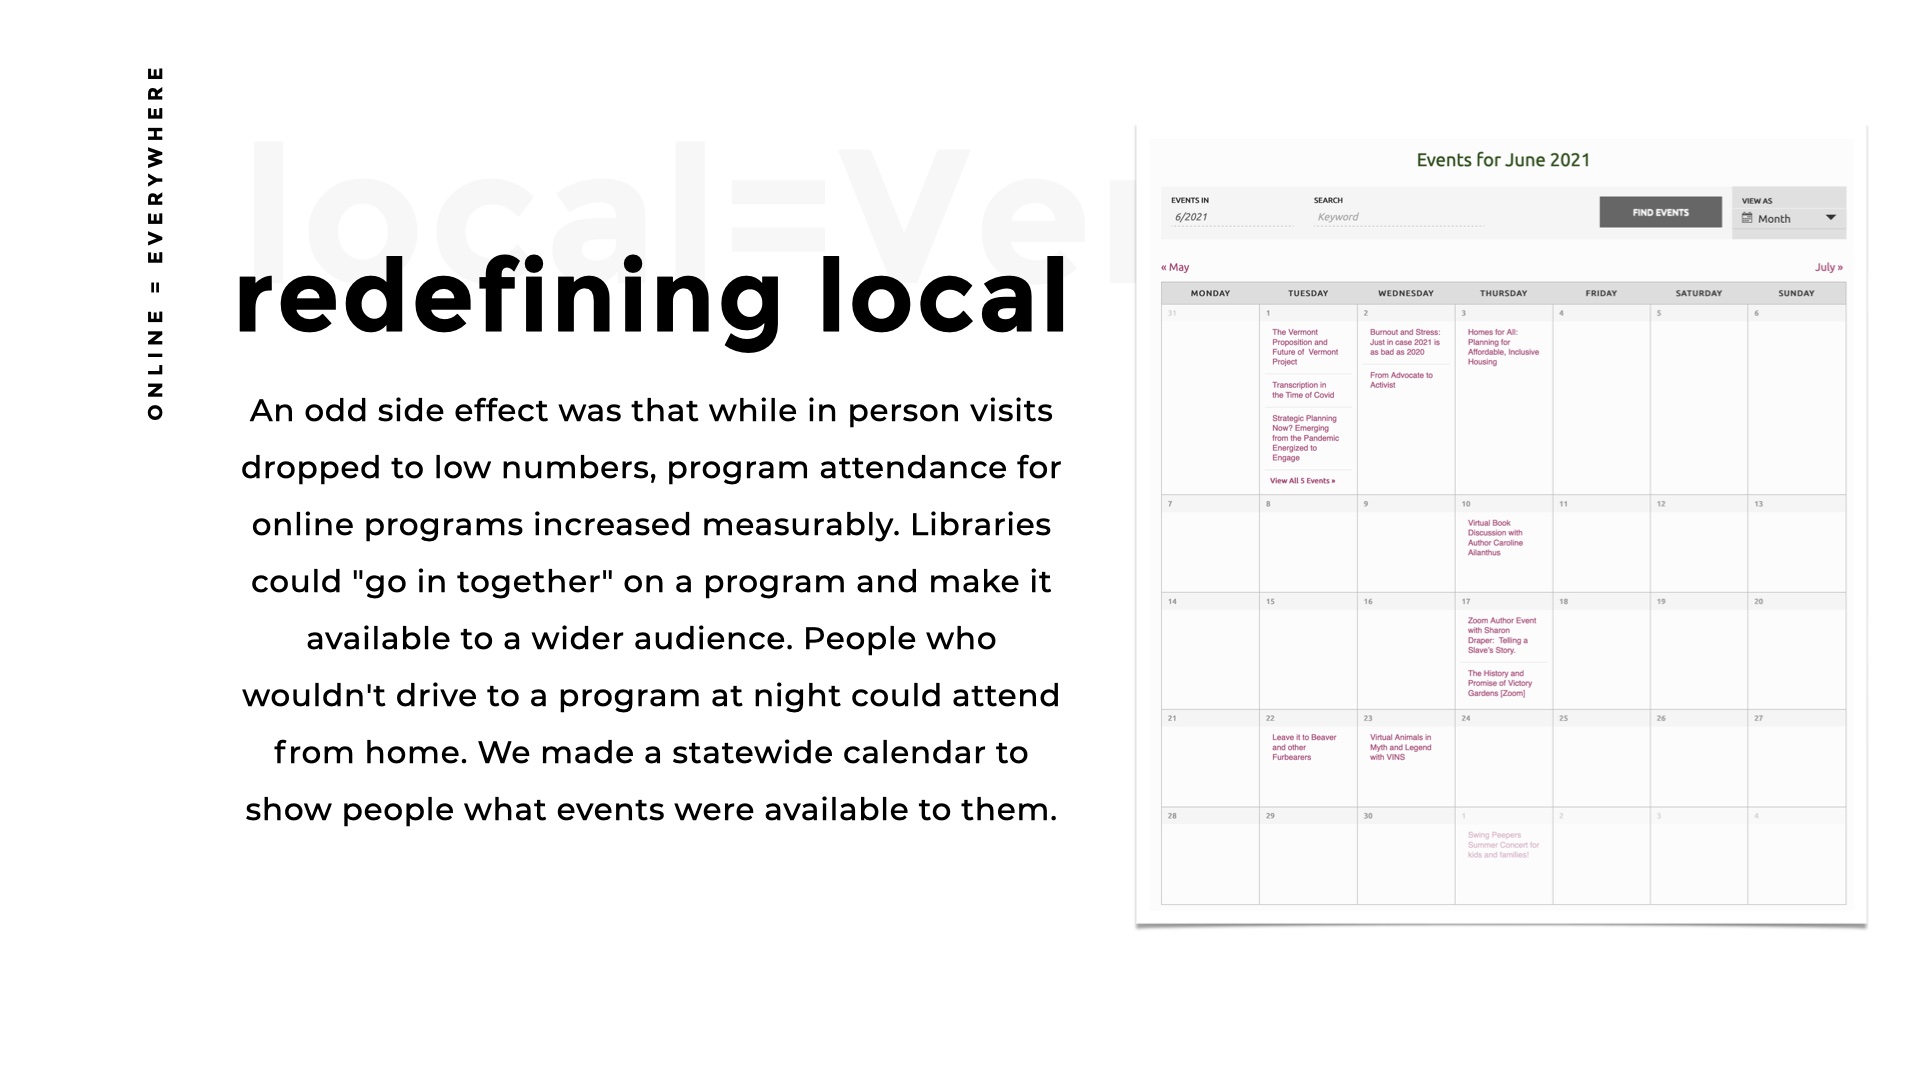 Screenshot of an online calendar that shows events happening statewide in Vermont. Headline: redefining Local. Text: An odd side effect was that while in person visits dropped to low numbers, program attendance for online programs increased measurably. Libraries could 